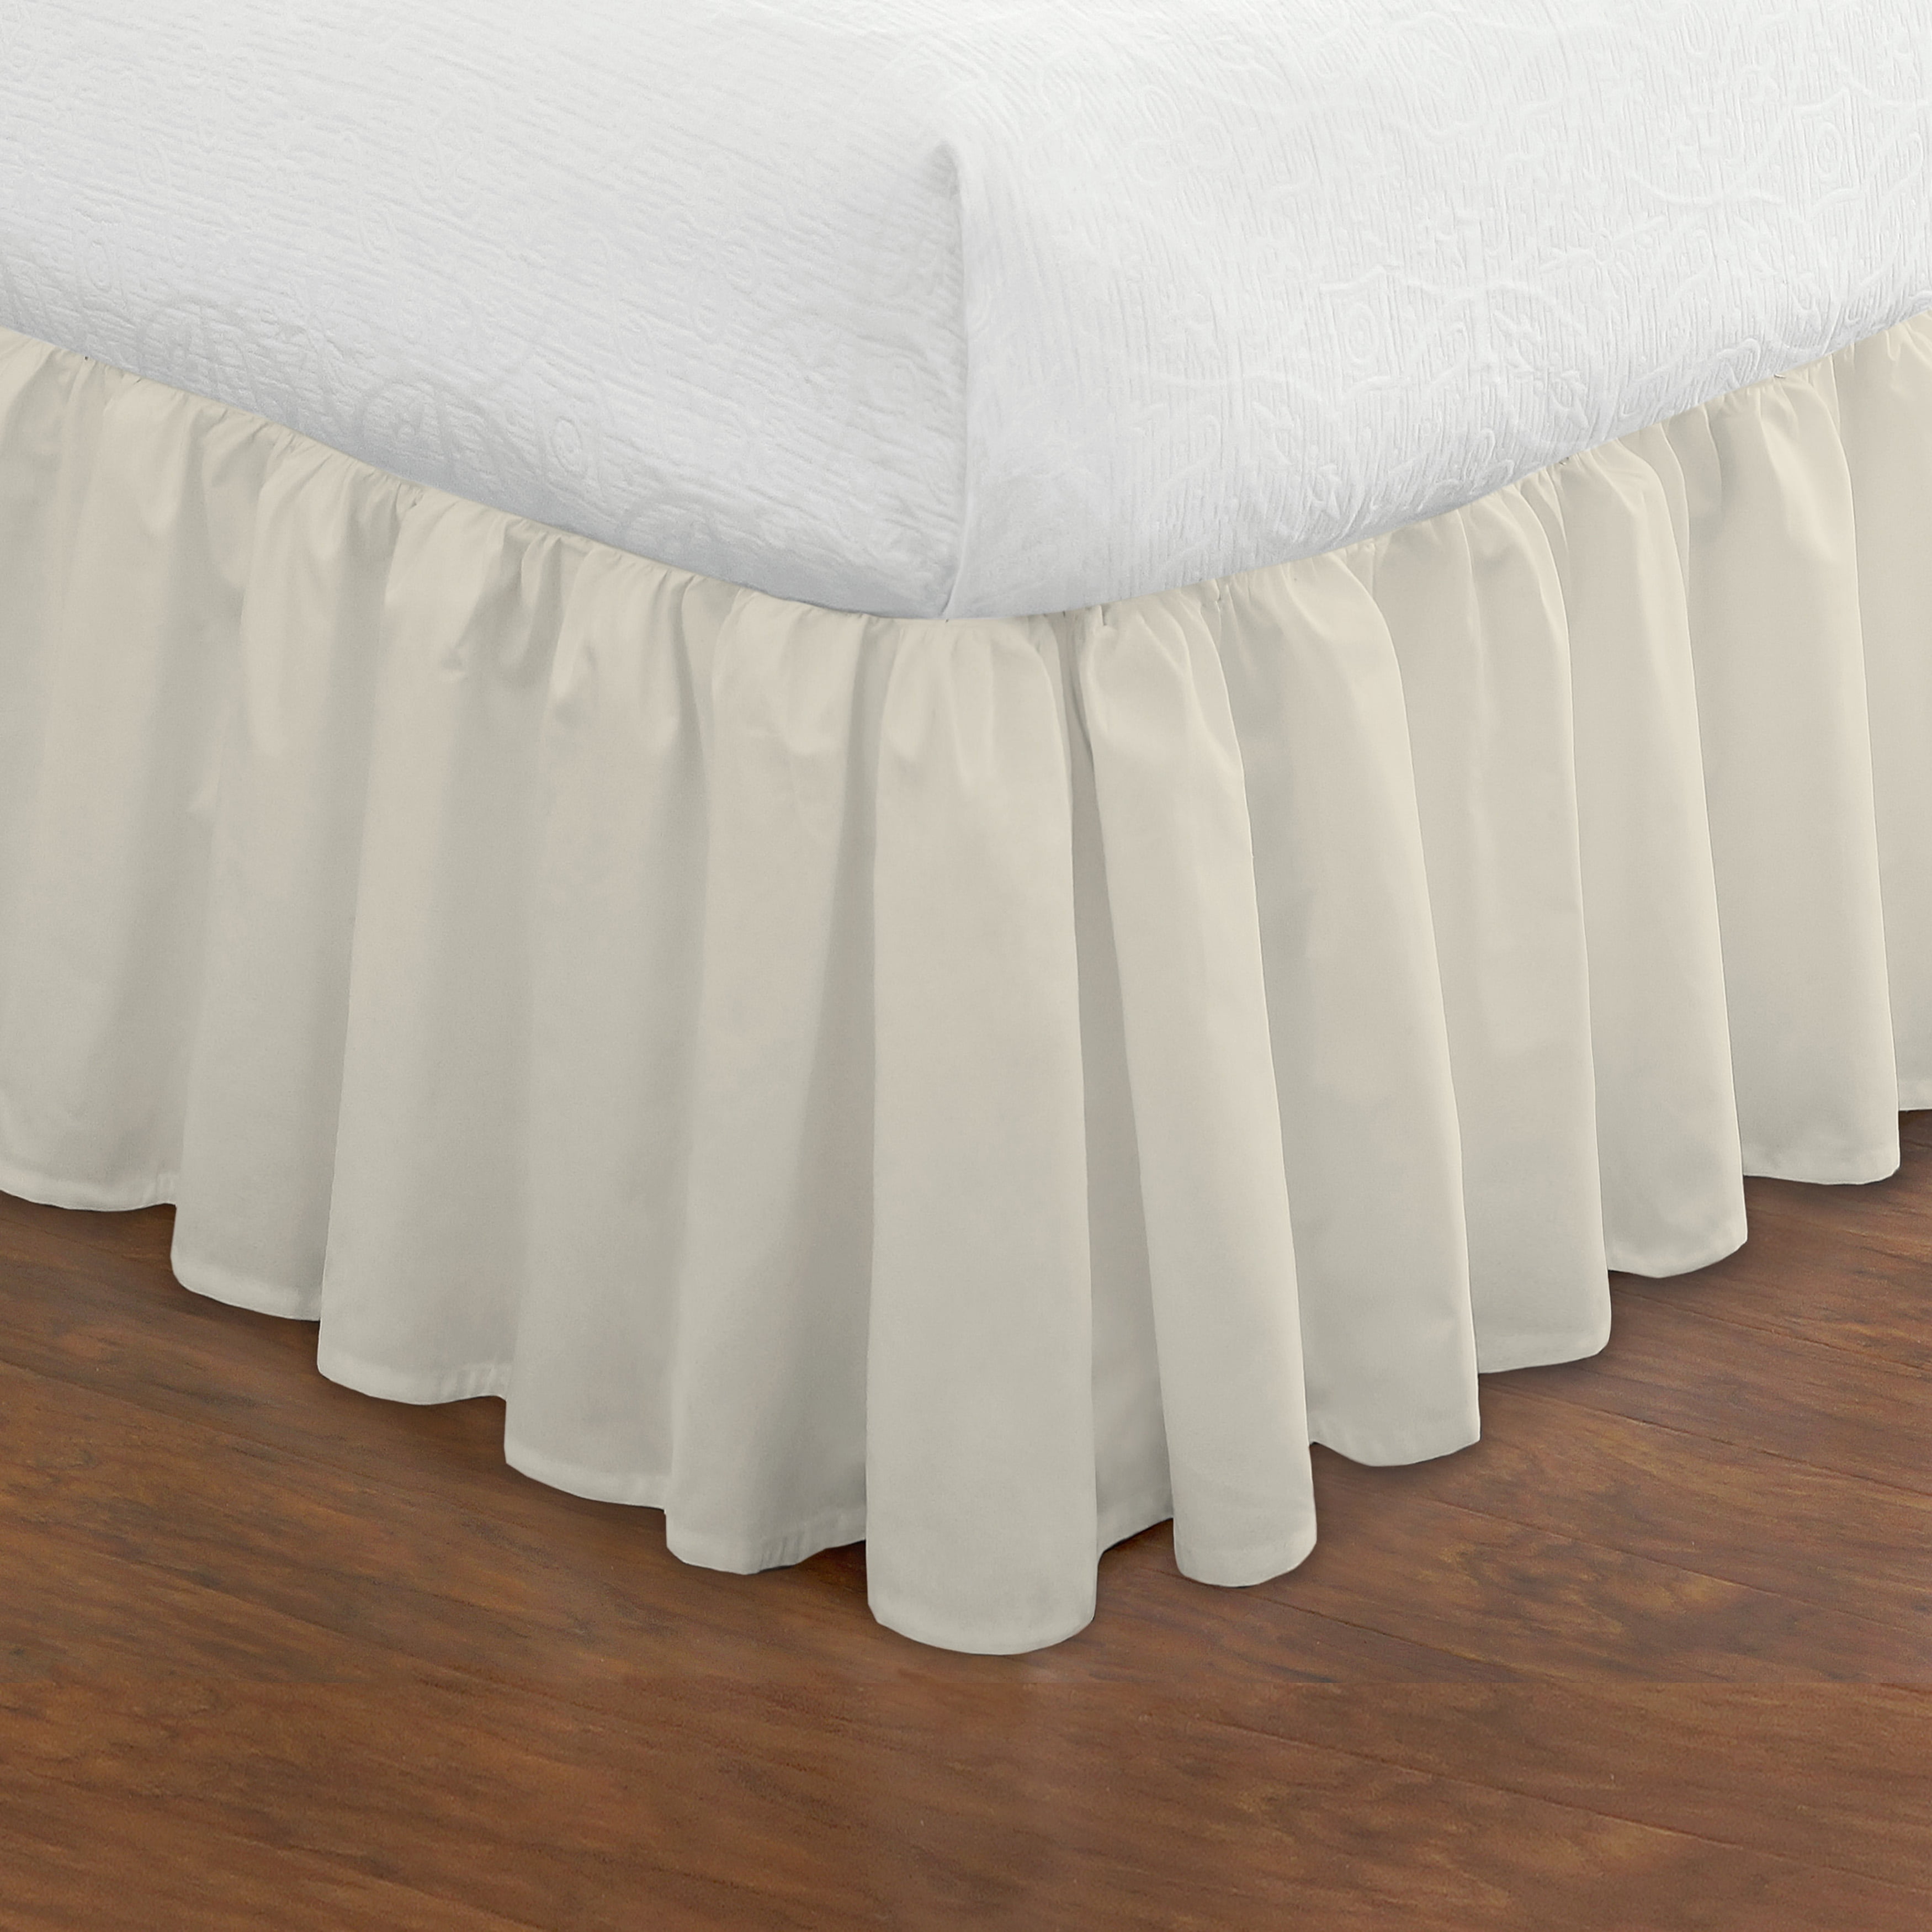 FRESH IDEAS Ideas Ruffled Eyelet Bed Skirt Dust Ruffle with Gathered  Styling and Embroidered Details, 14 Drop Length, Queen, White